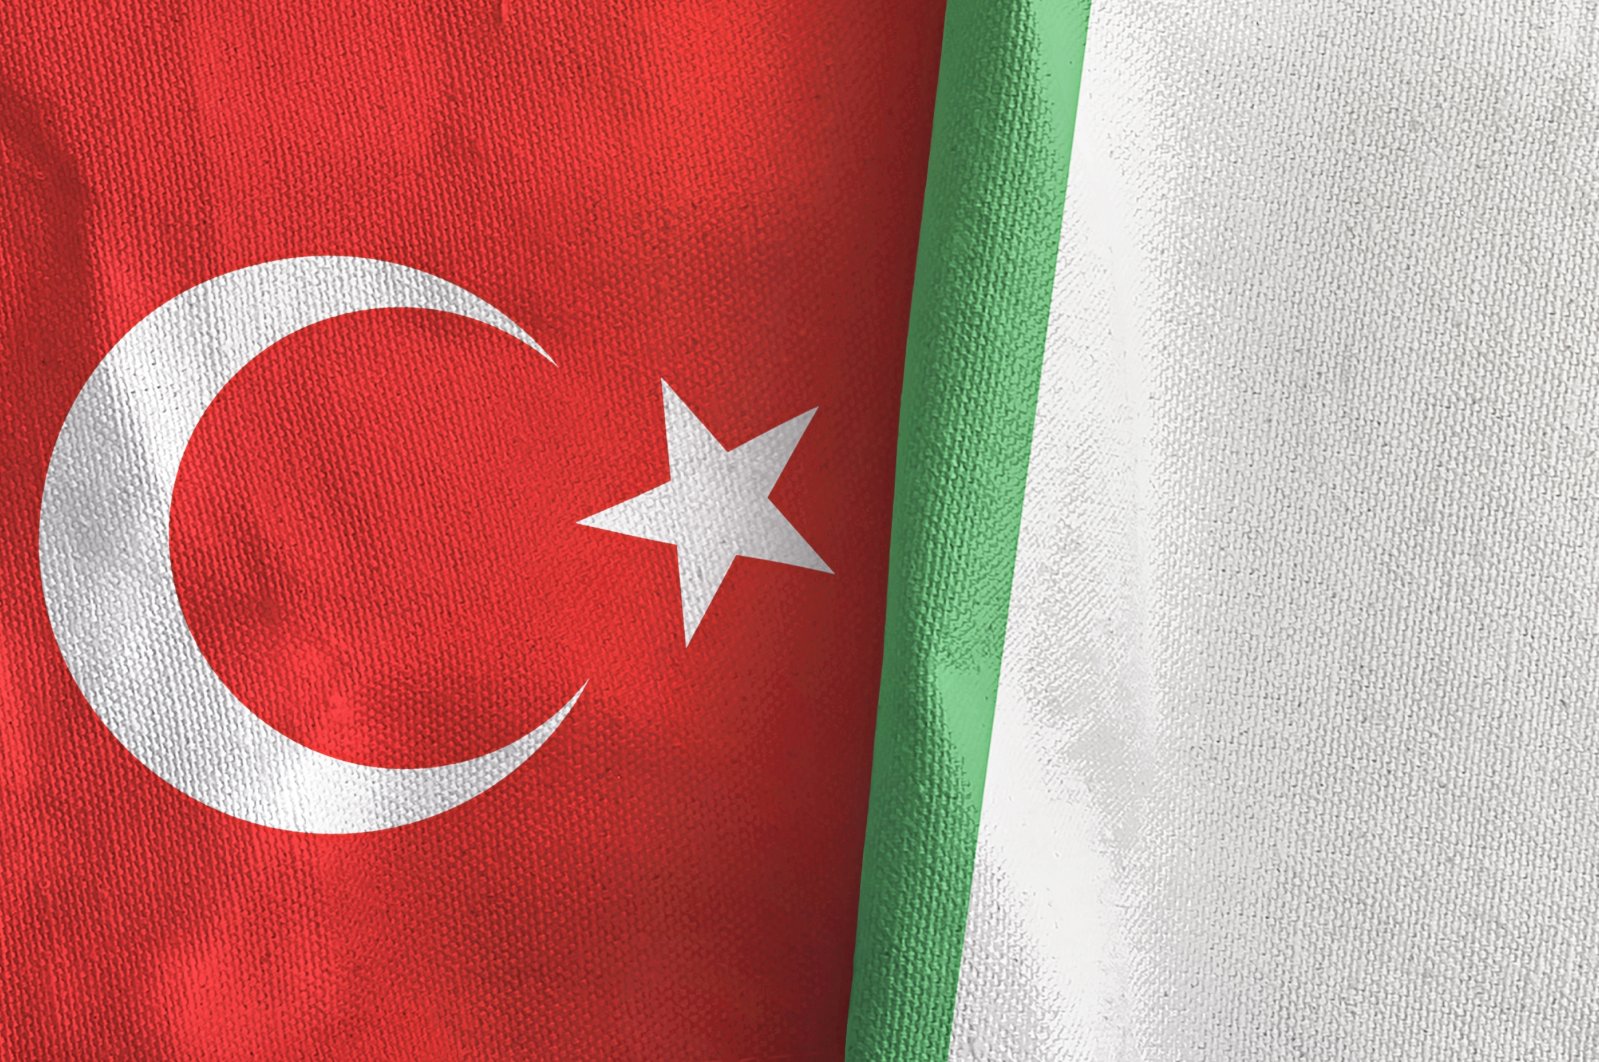 Italian and Turkish flags folded together (Shutterstock Photo)